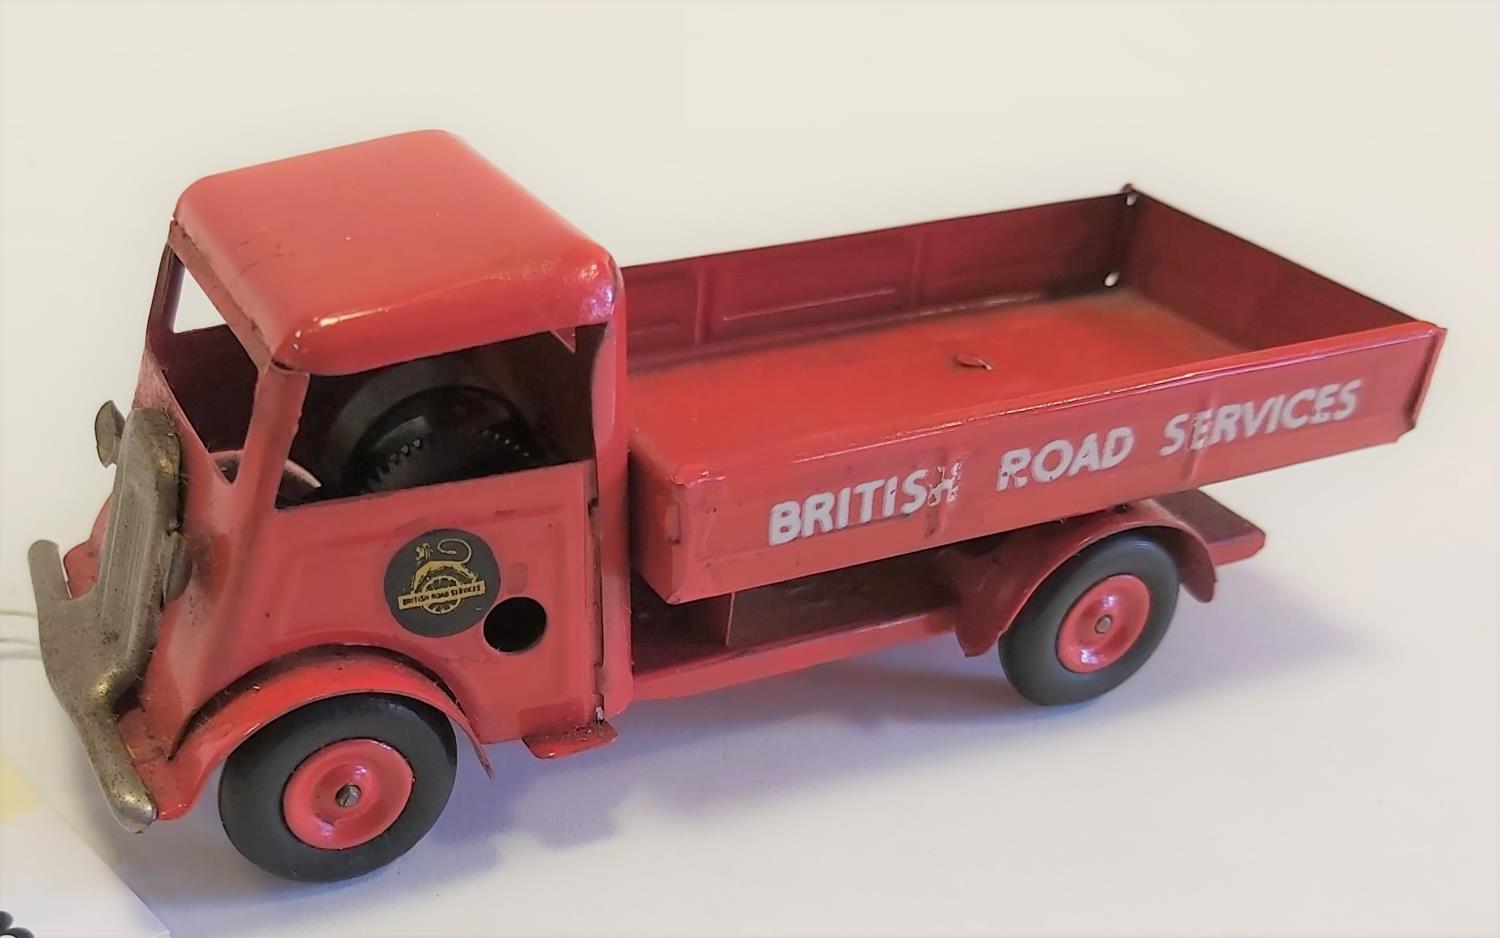 Tri-ang Minic tinplate clockwork Open Lorry. A short nose example in bright red British Road Service